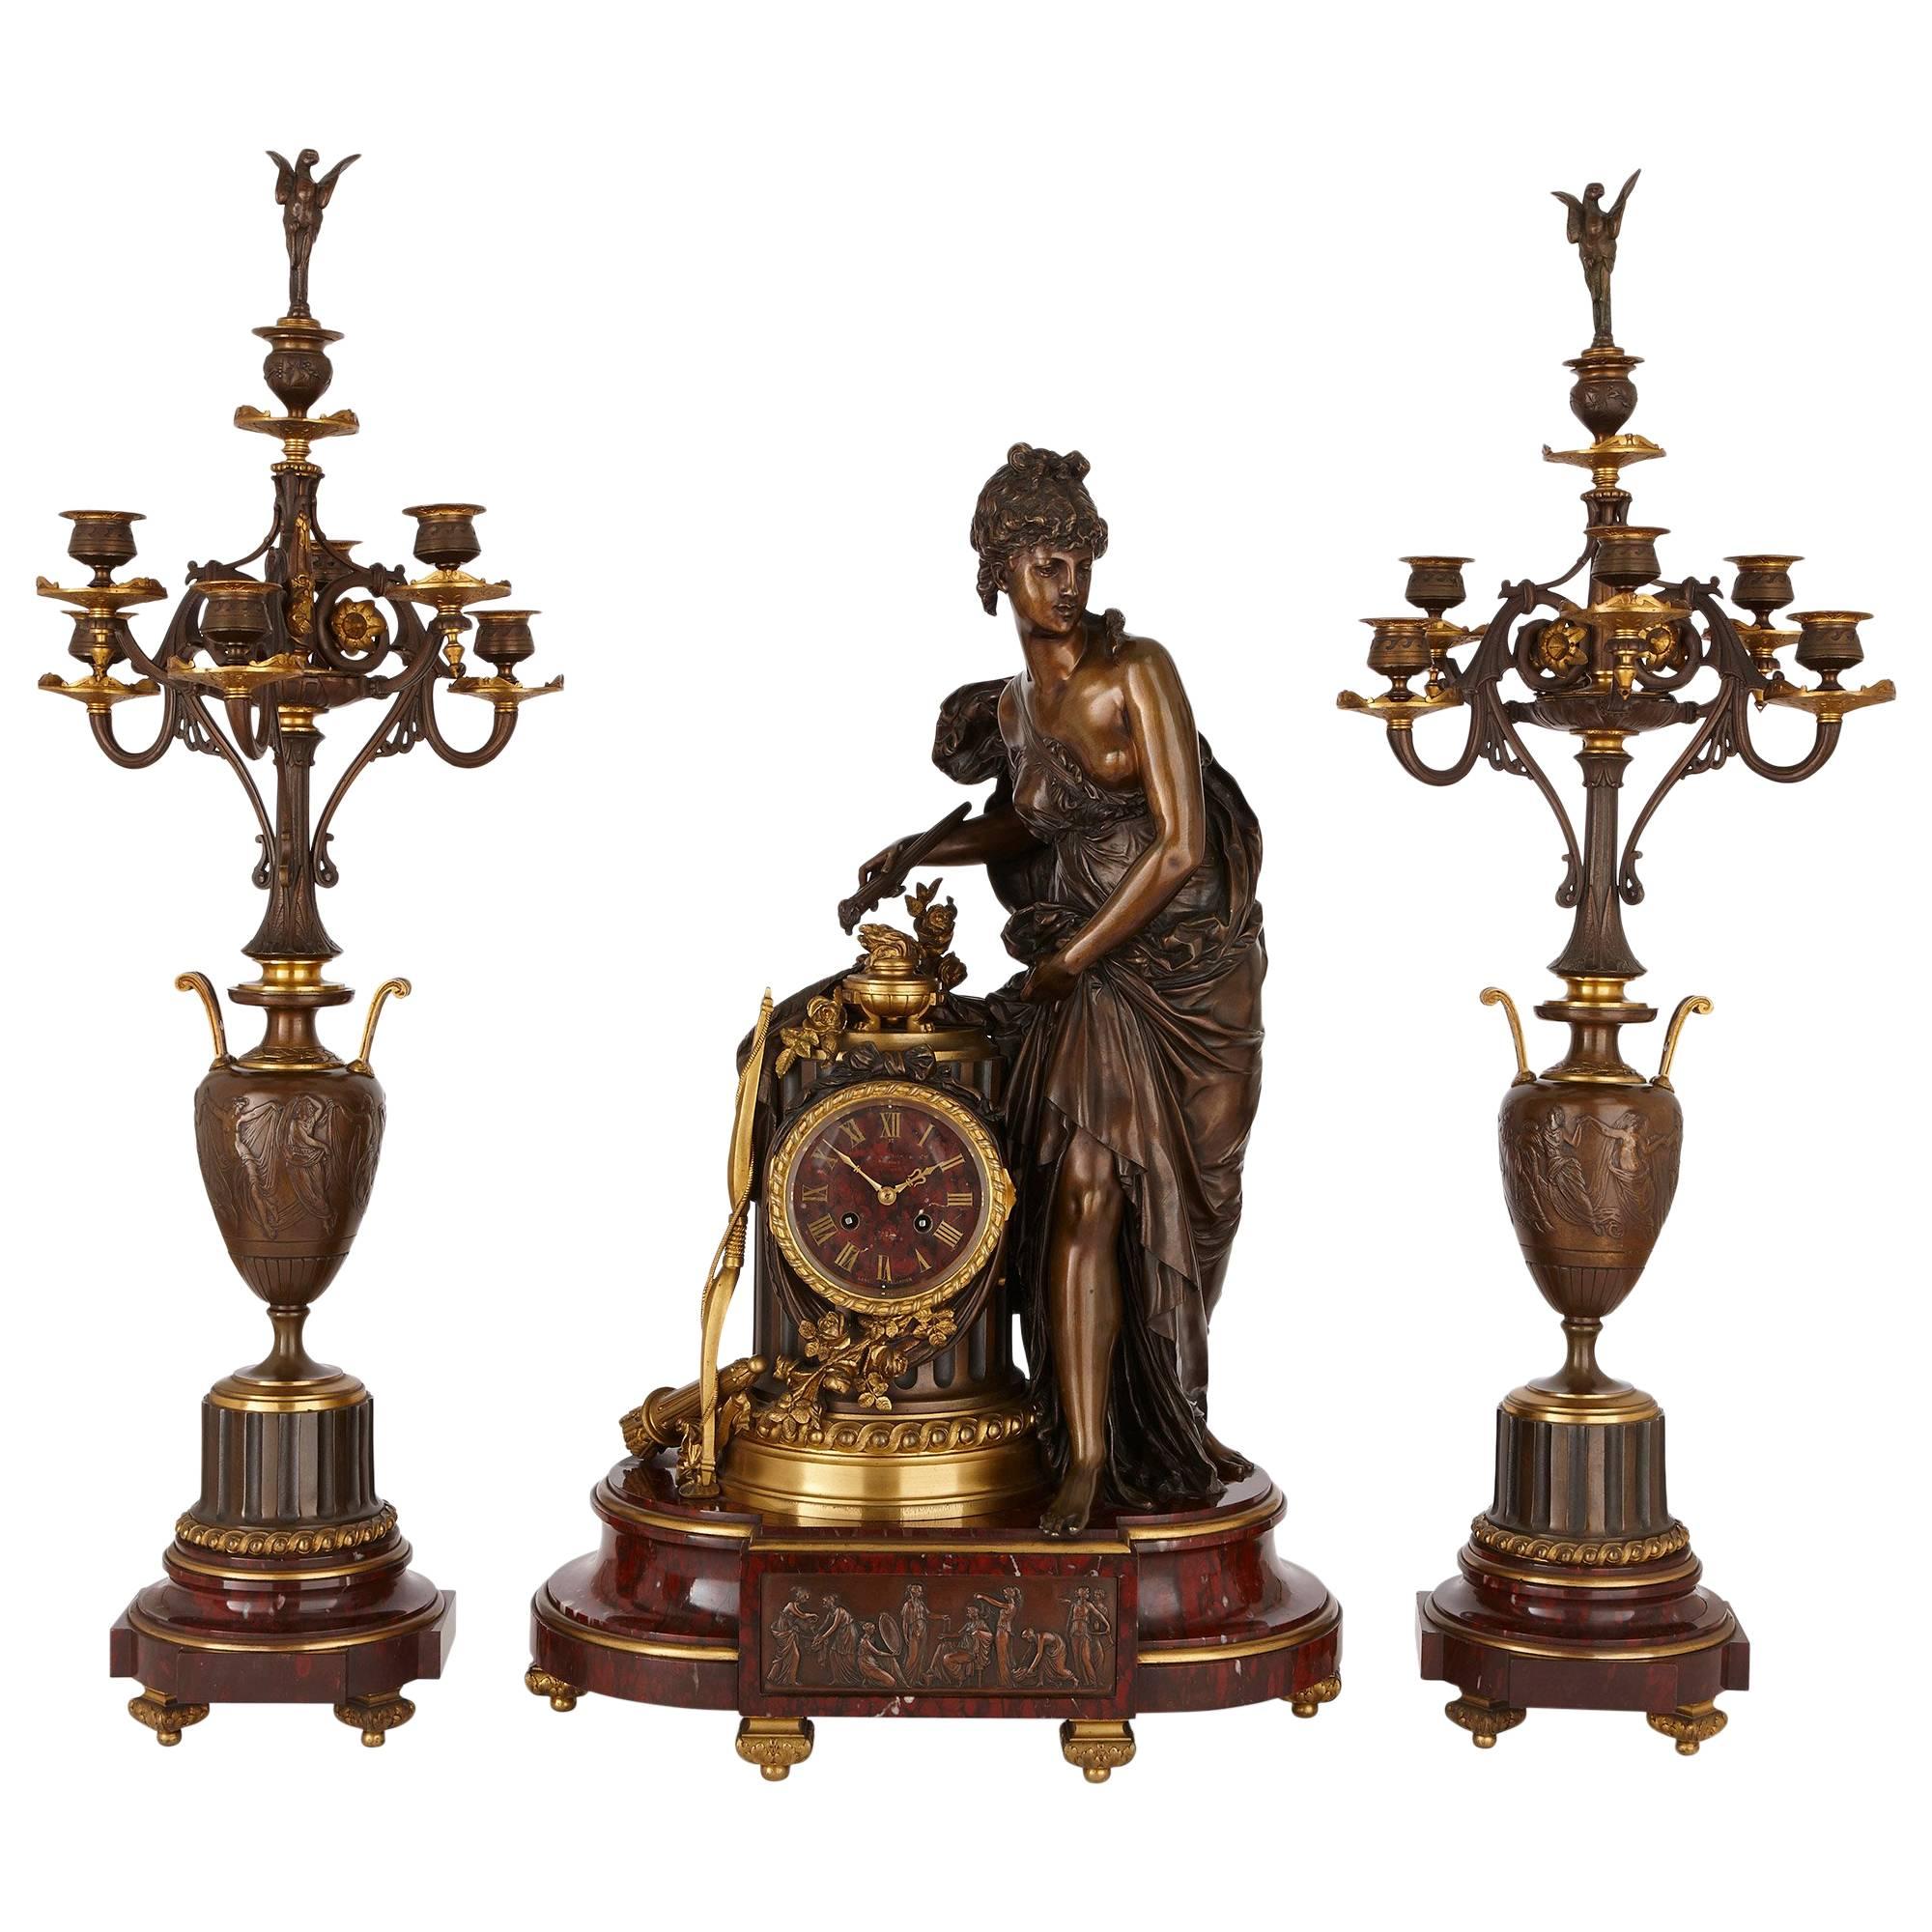 Lemerle-Charpentier & Cie Marble, Gilt and Patinated Bronze Clock Set